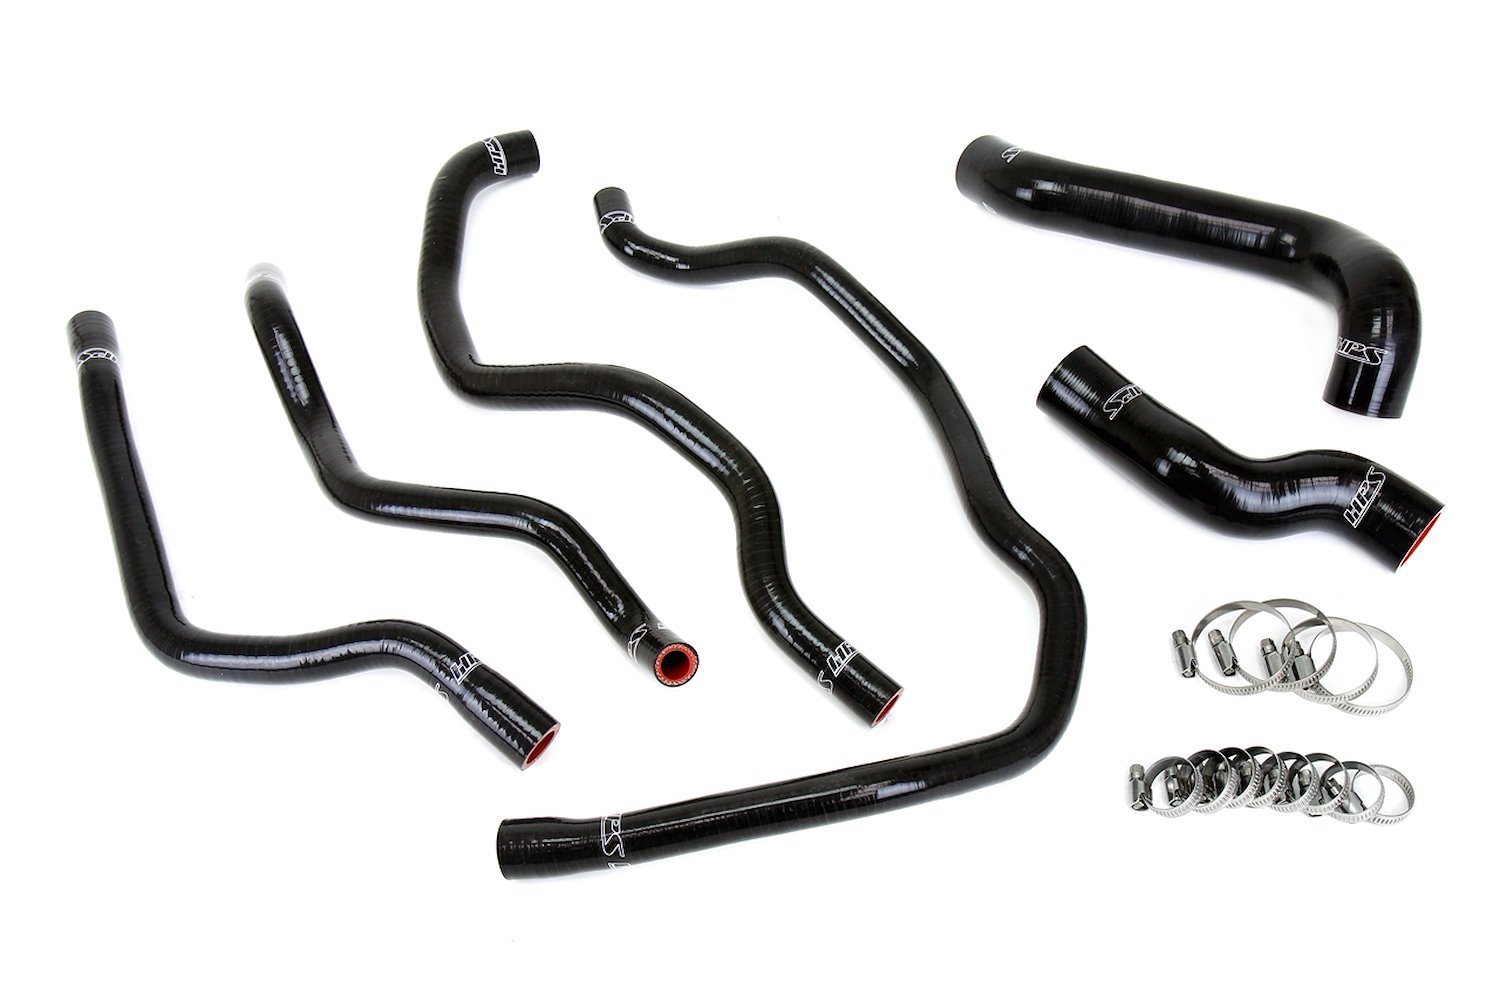 57-2076-BLK Radiator and Heater Hose Kit, 3-Ply Reinforced Silicone, Replaces Rubber Radiator & Heater Hoses